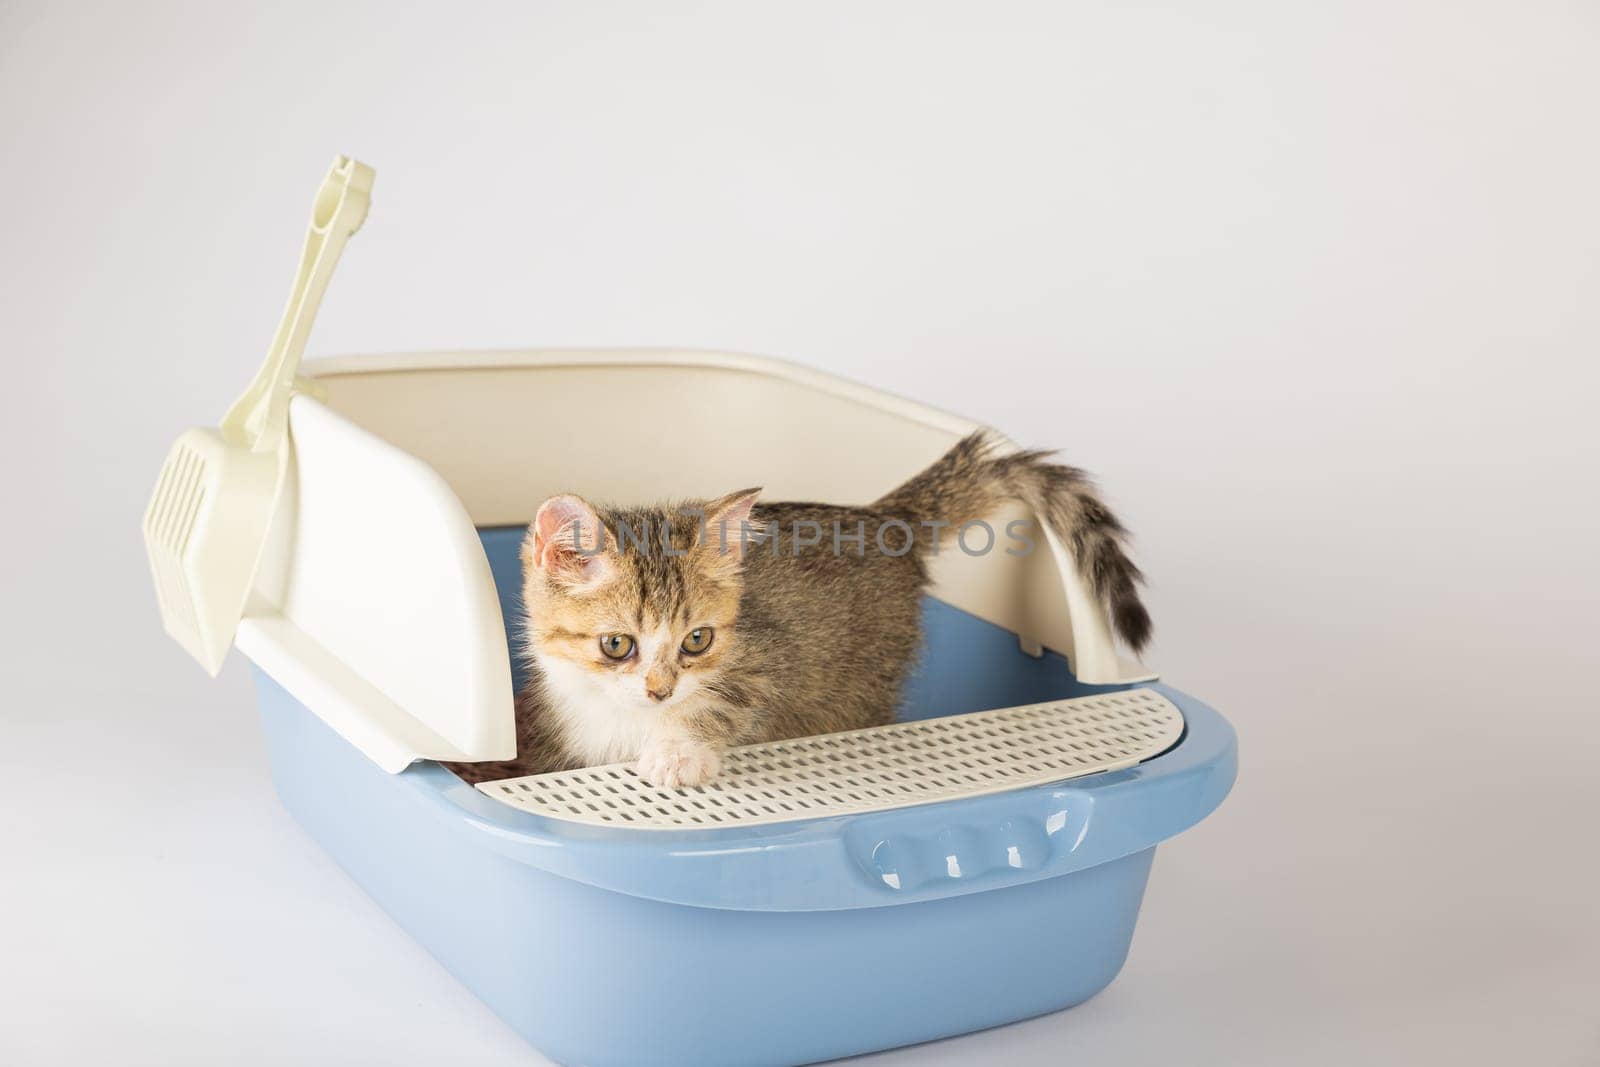 An isolated cat seated in plastic litter toilet box or sandbox set against clean white backdrop. This educational image underscores feline hygiene and care presenting clean well-maintained environment